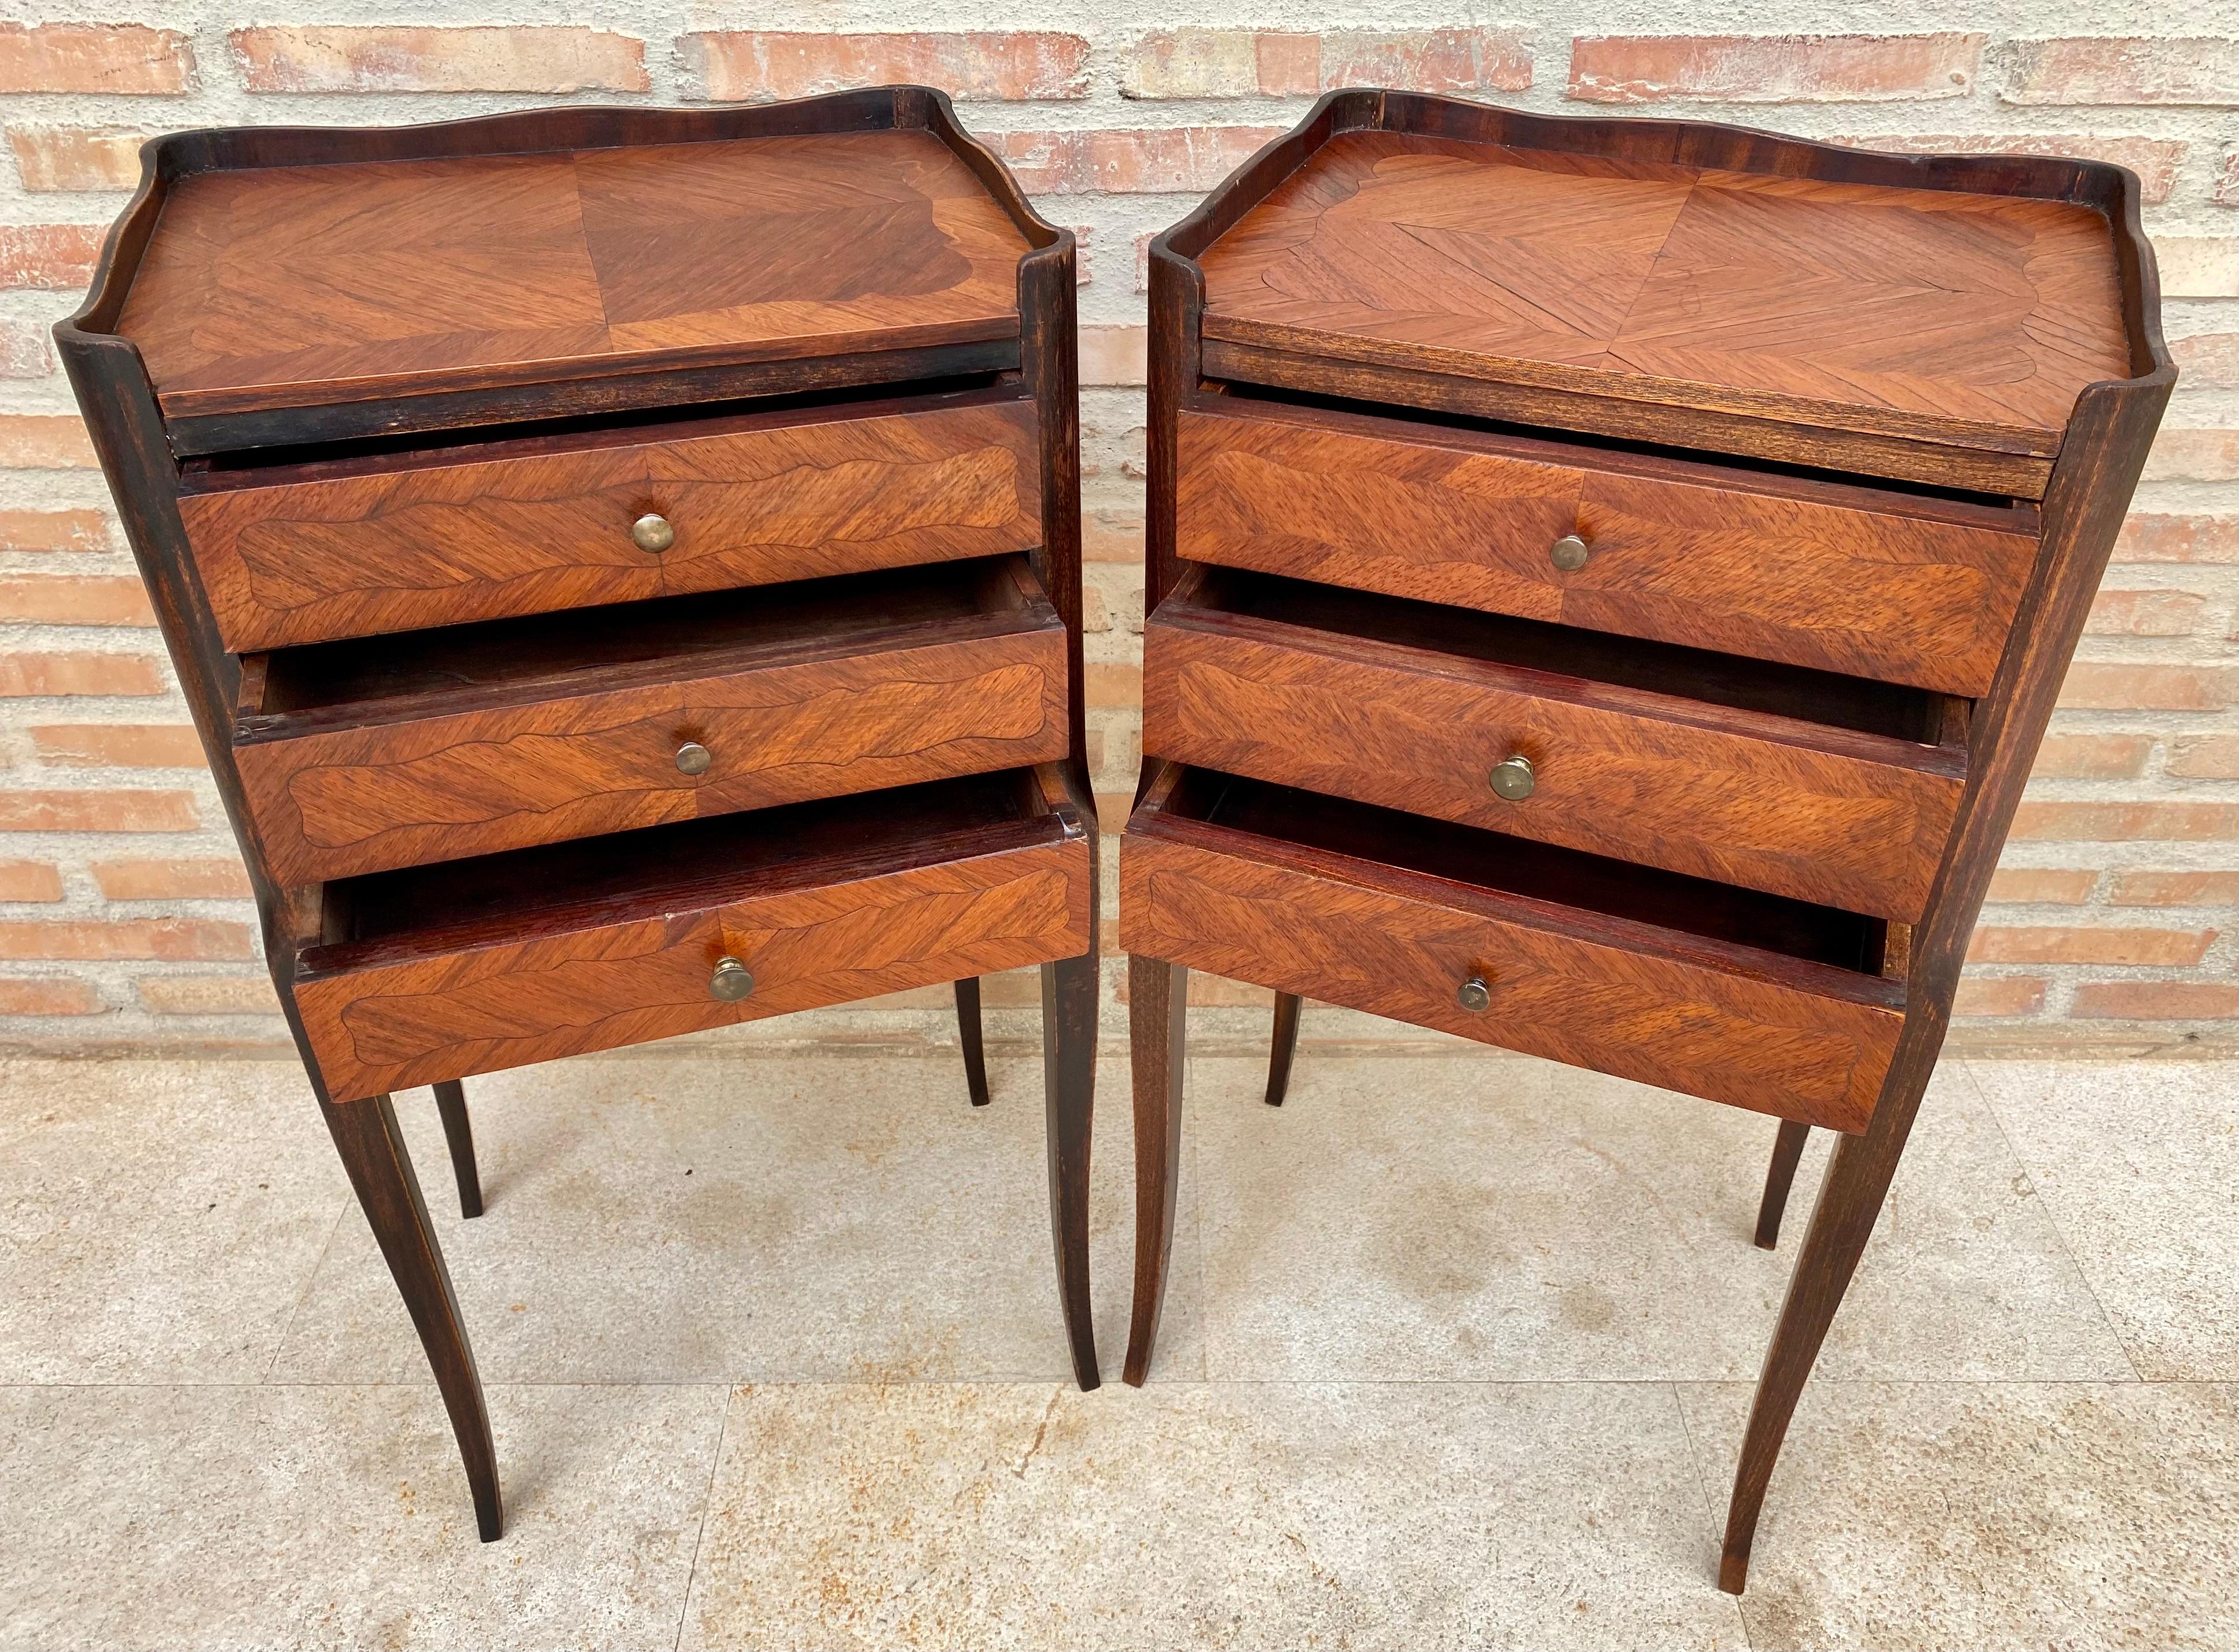 20th Century French Walnut Nightstands with Three Drawers, 1940s, Set of 2